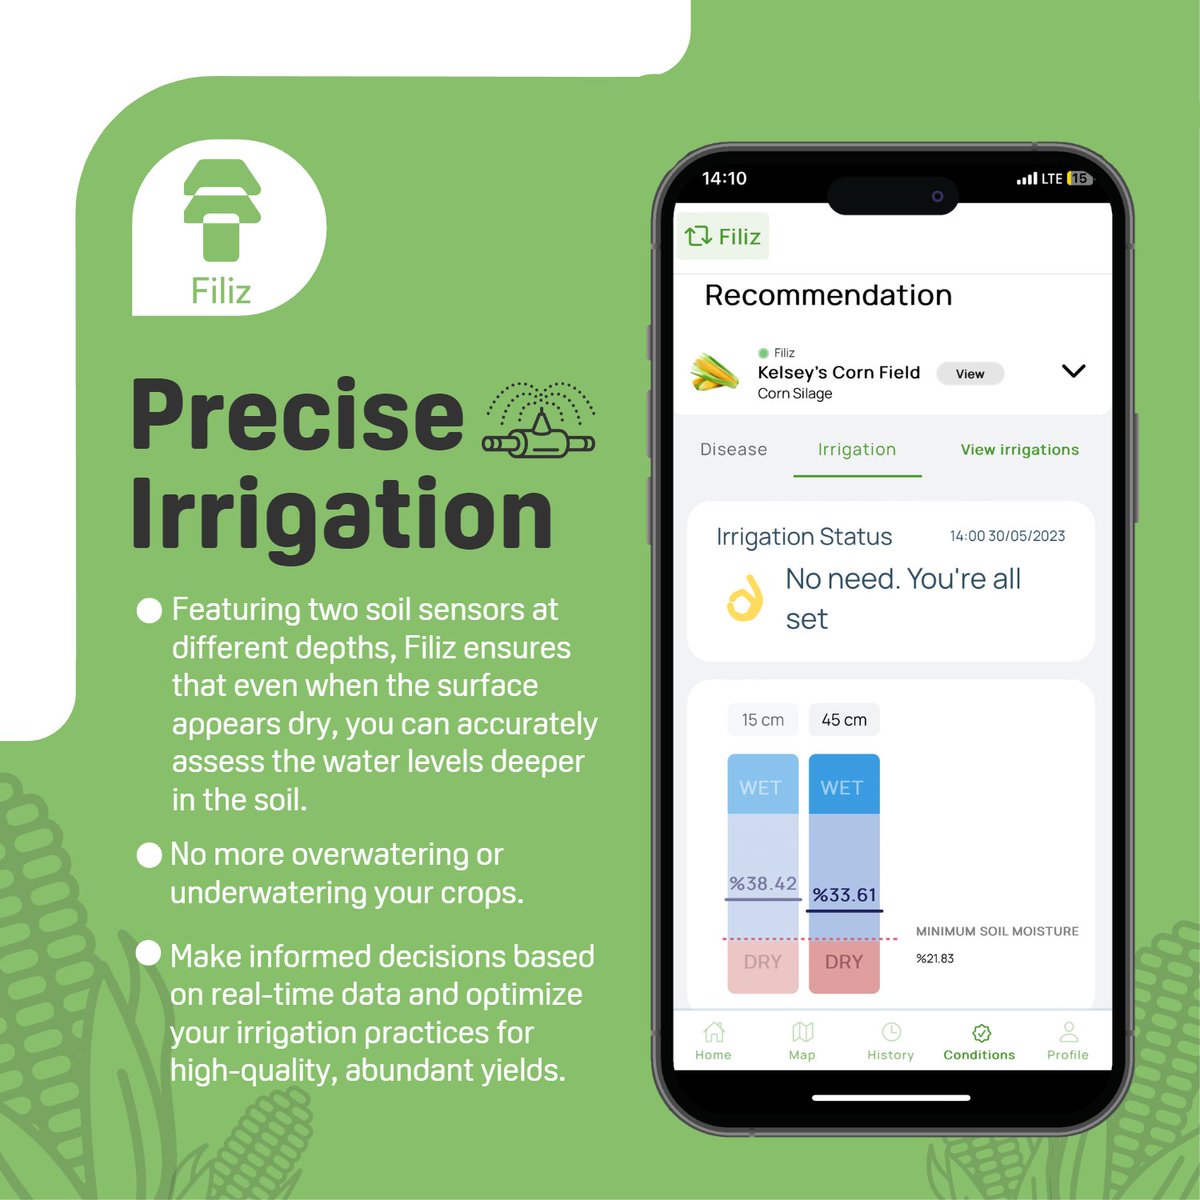 Monitor soil moisture with precision to eliminate water stress and reduce waste. Get your own #Filiz and unlock the potential of precision farming. Find out more at: bit.ly/43wqdKL

#precisisonfarming #agtech #Doktar #iotsensors #ResourceManagement #efficientirrigation